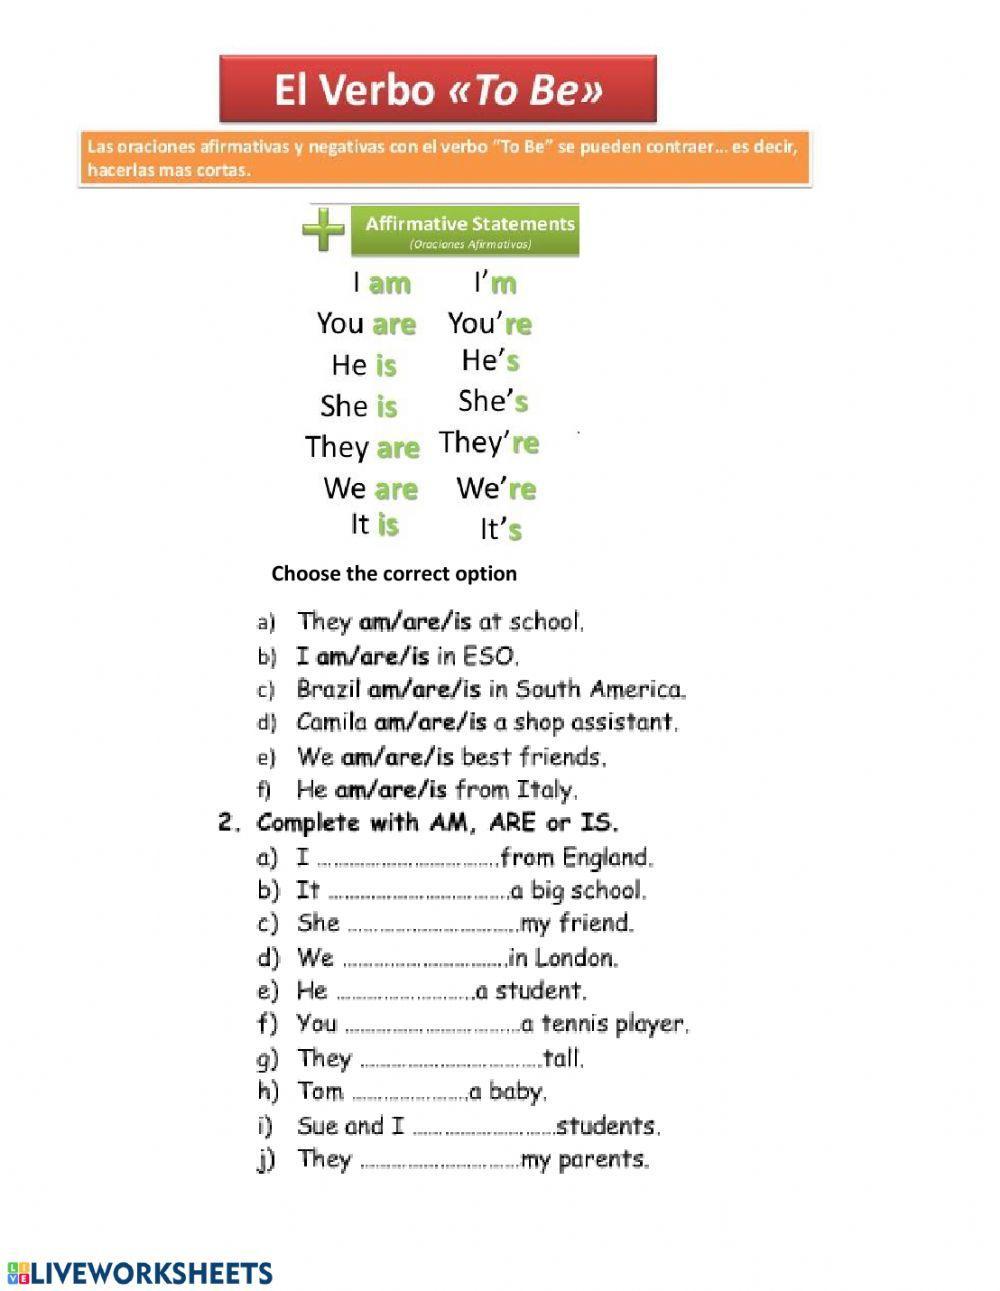 Subject Pronouns and Verb to be